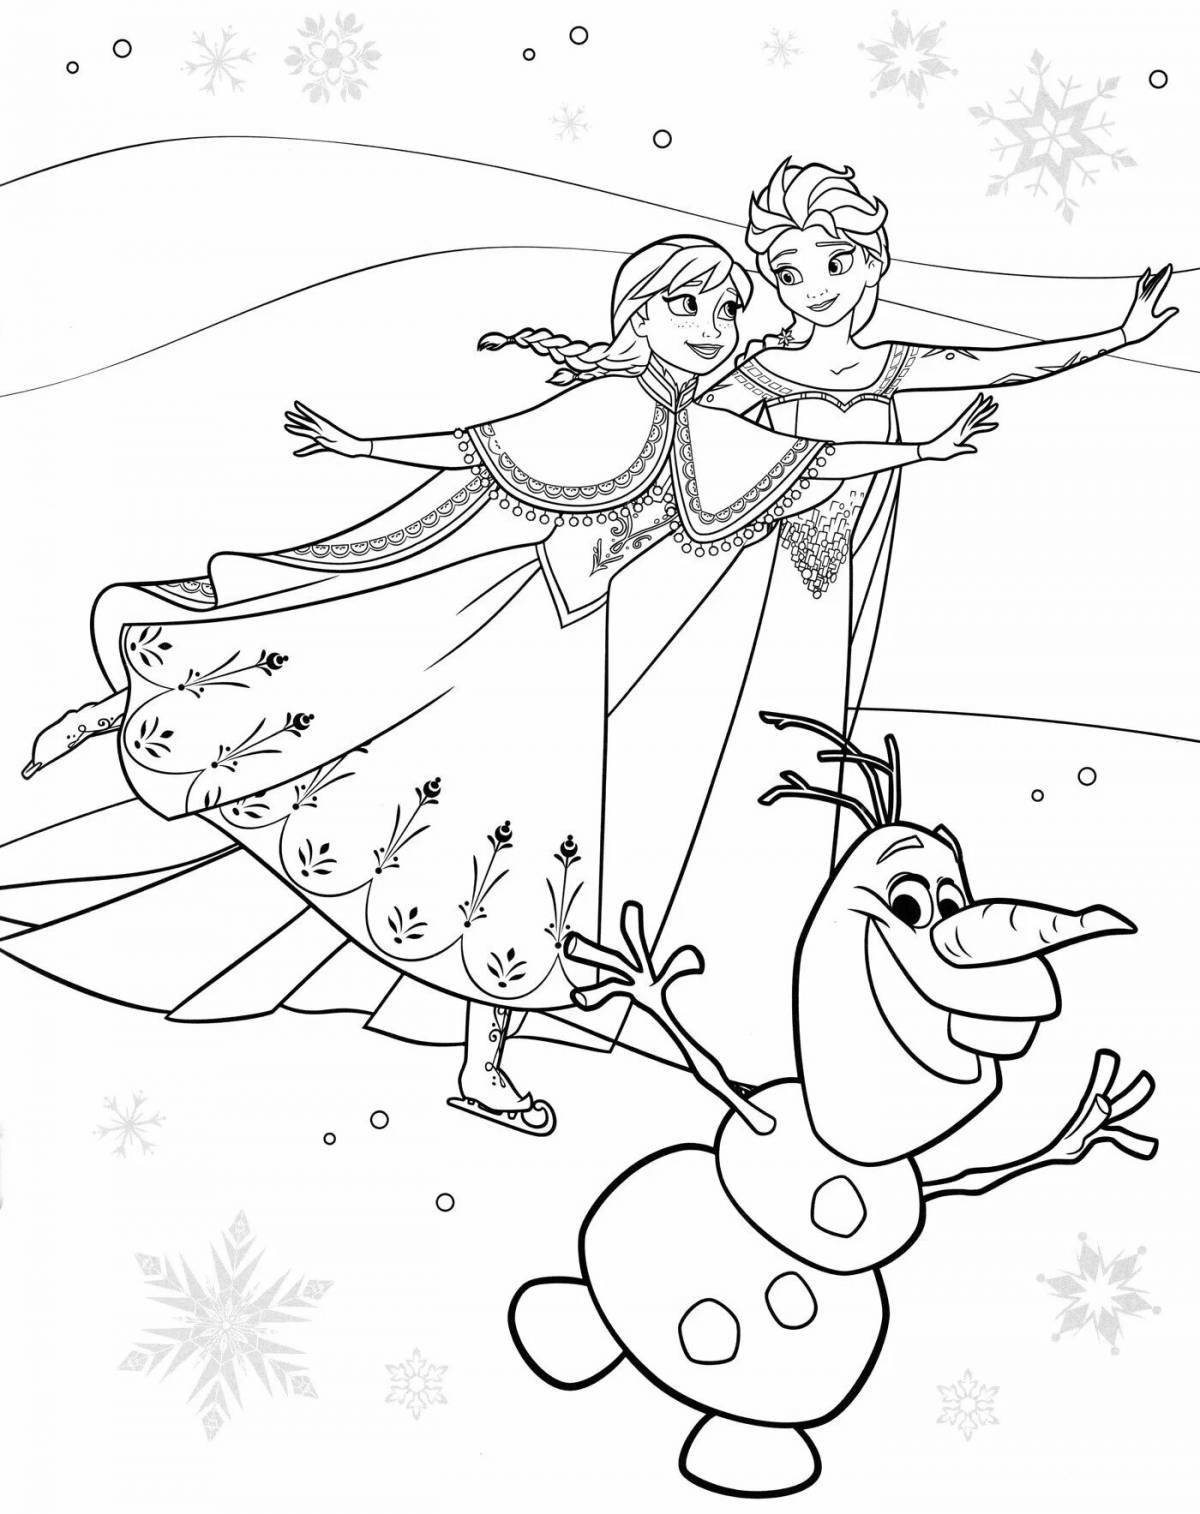 Glitter Frozen coloring page for 5-6 year olds